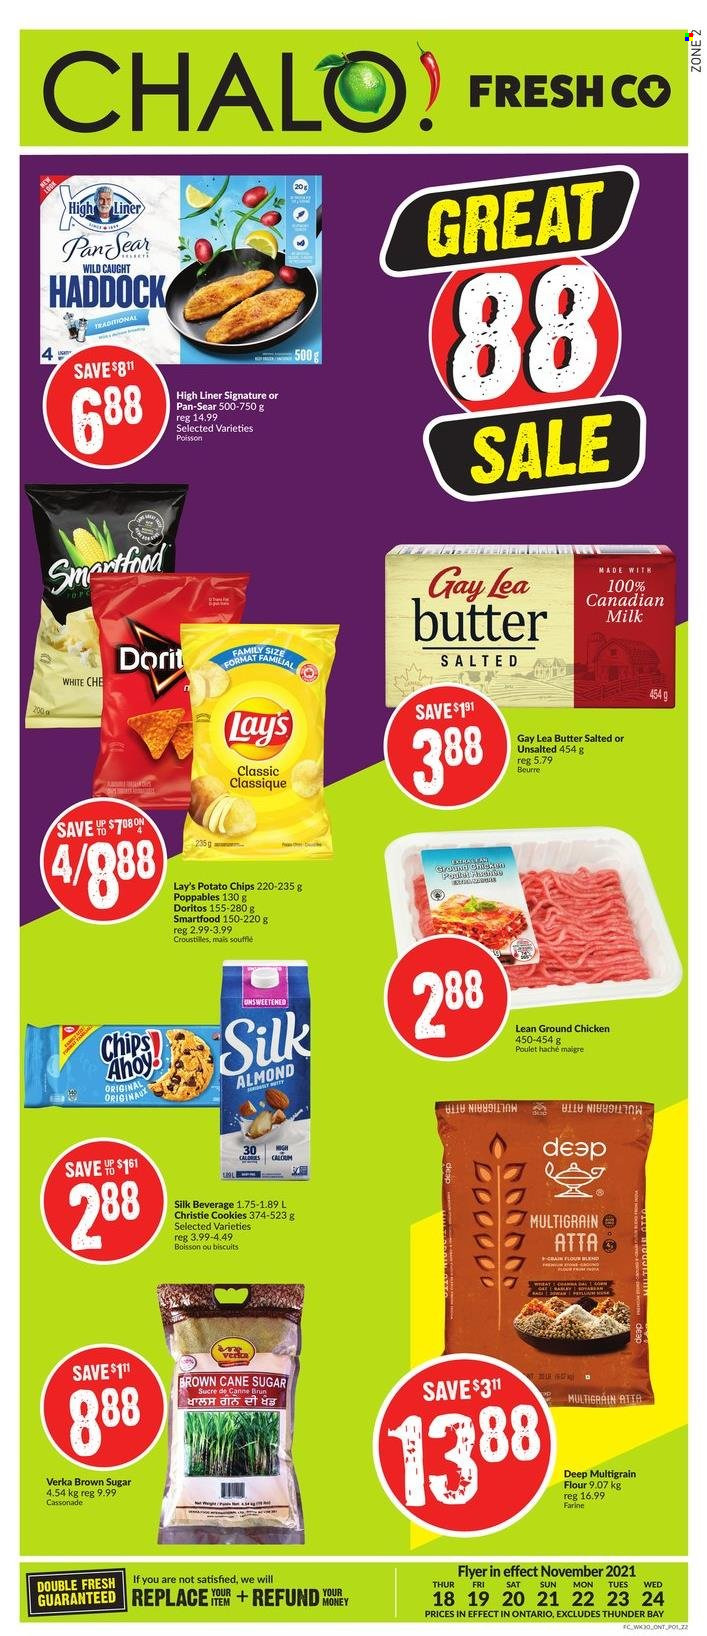 thumbnail - Circulaire Chalo! FreshCo. - 18 Novembre 2021 - 24 Novembre 2021 - Produits soldés - biscuits, cookies, chips, Lay’s, cassonade, farine, sucre, haddock. Page 1.